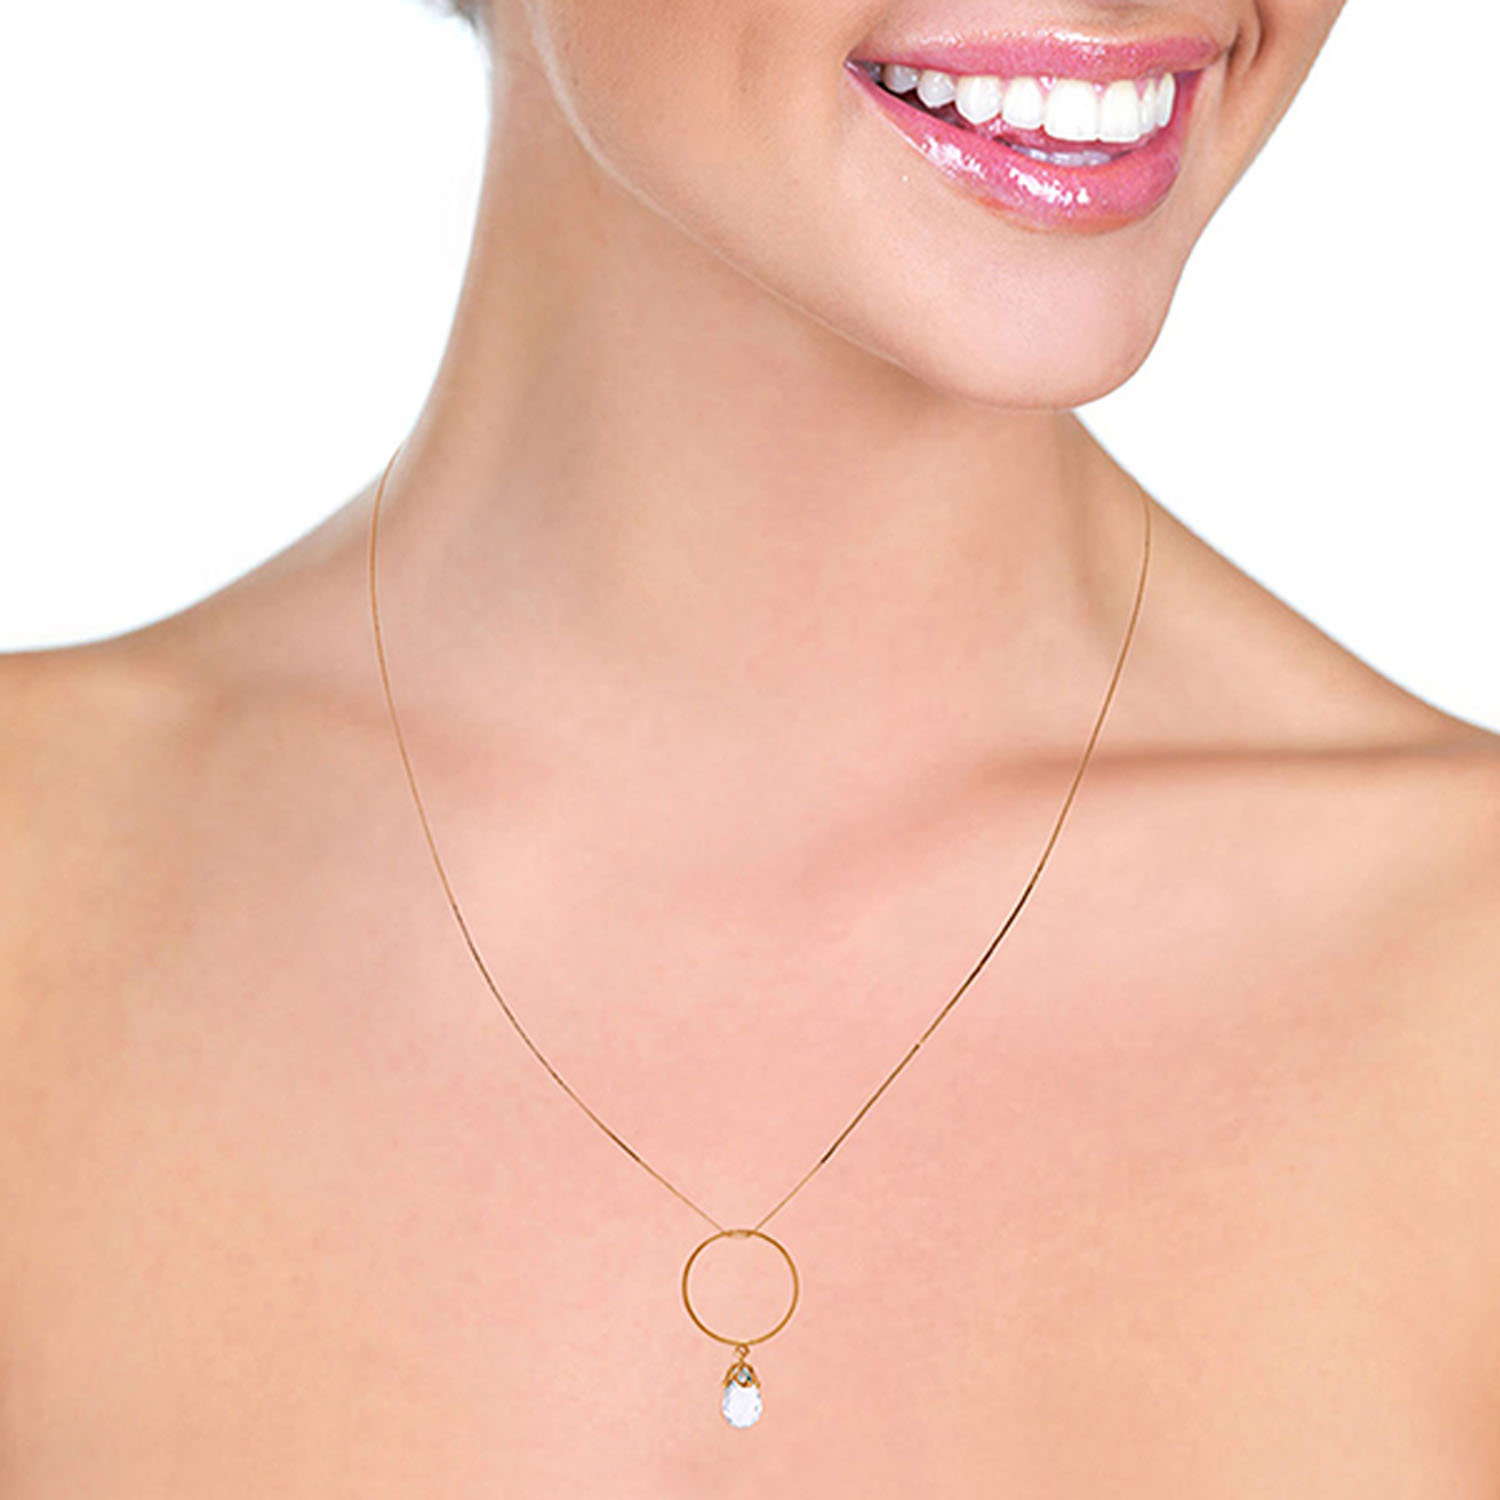 Galaxy Gold 3 Carat 14k 16" Solid Rose Gold Necklace with Natural Rose Topaz Charm Circle Pendant - image 2 of 2